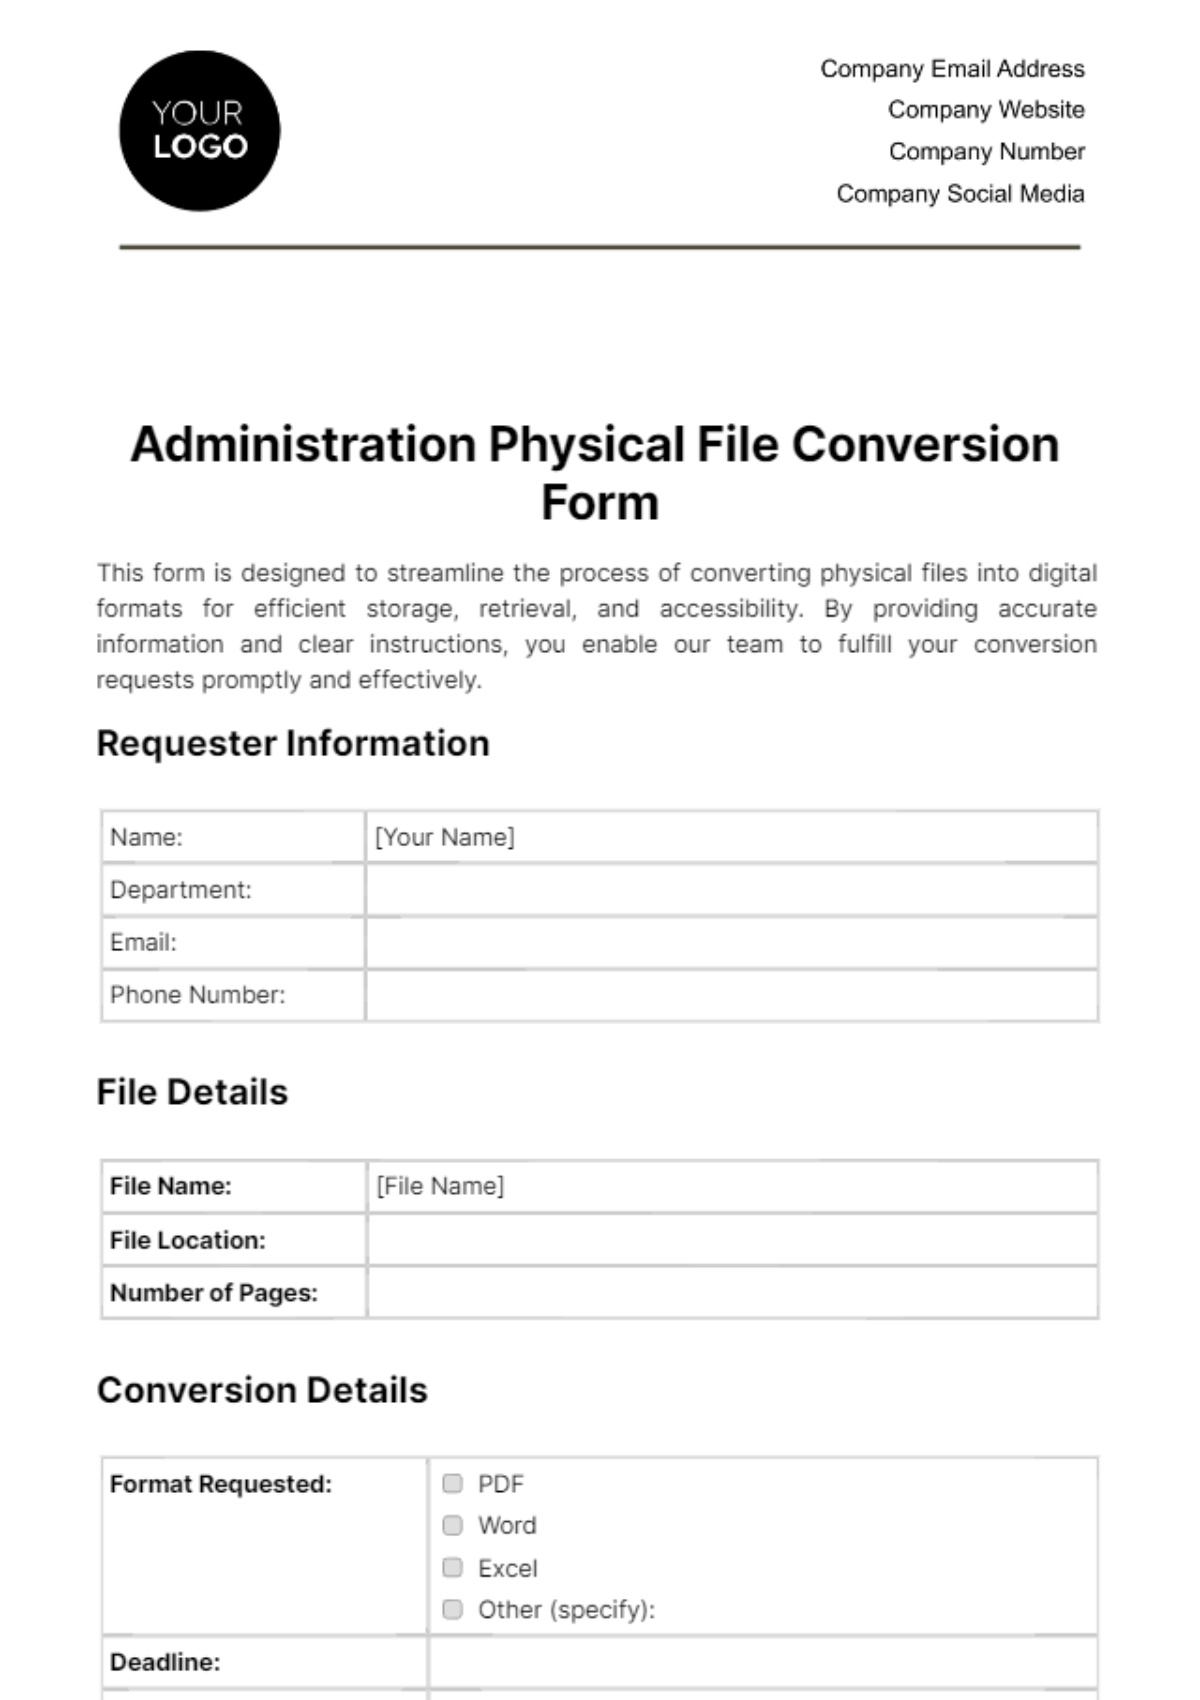 Free Administration Physical File Conversion Form Template